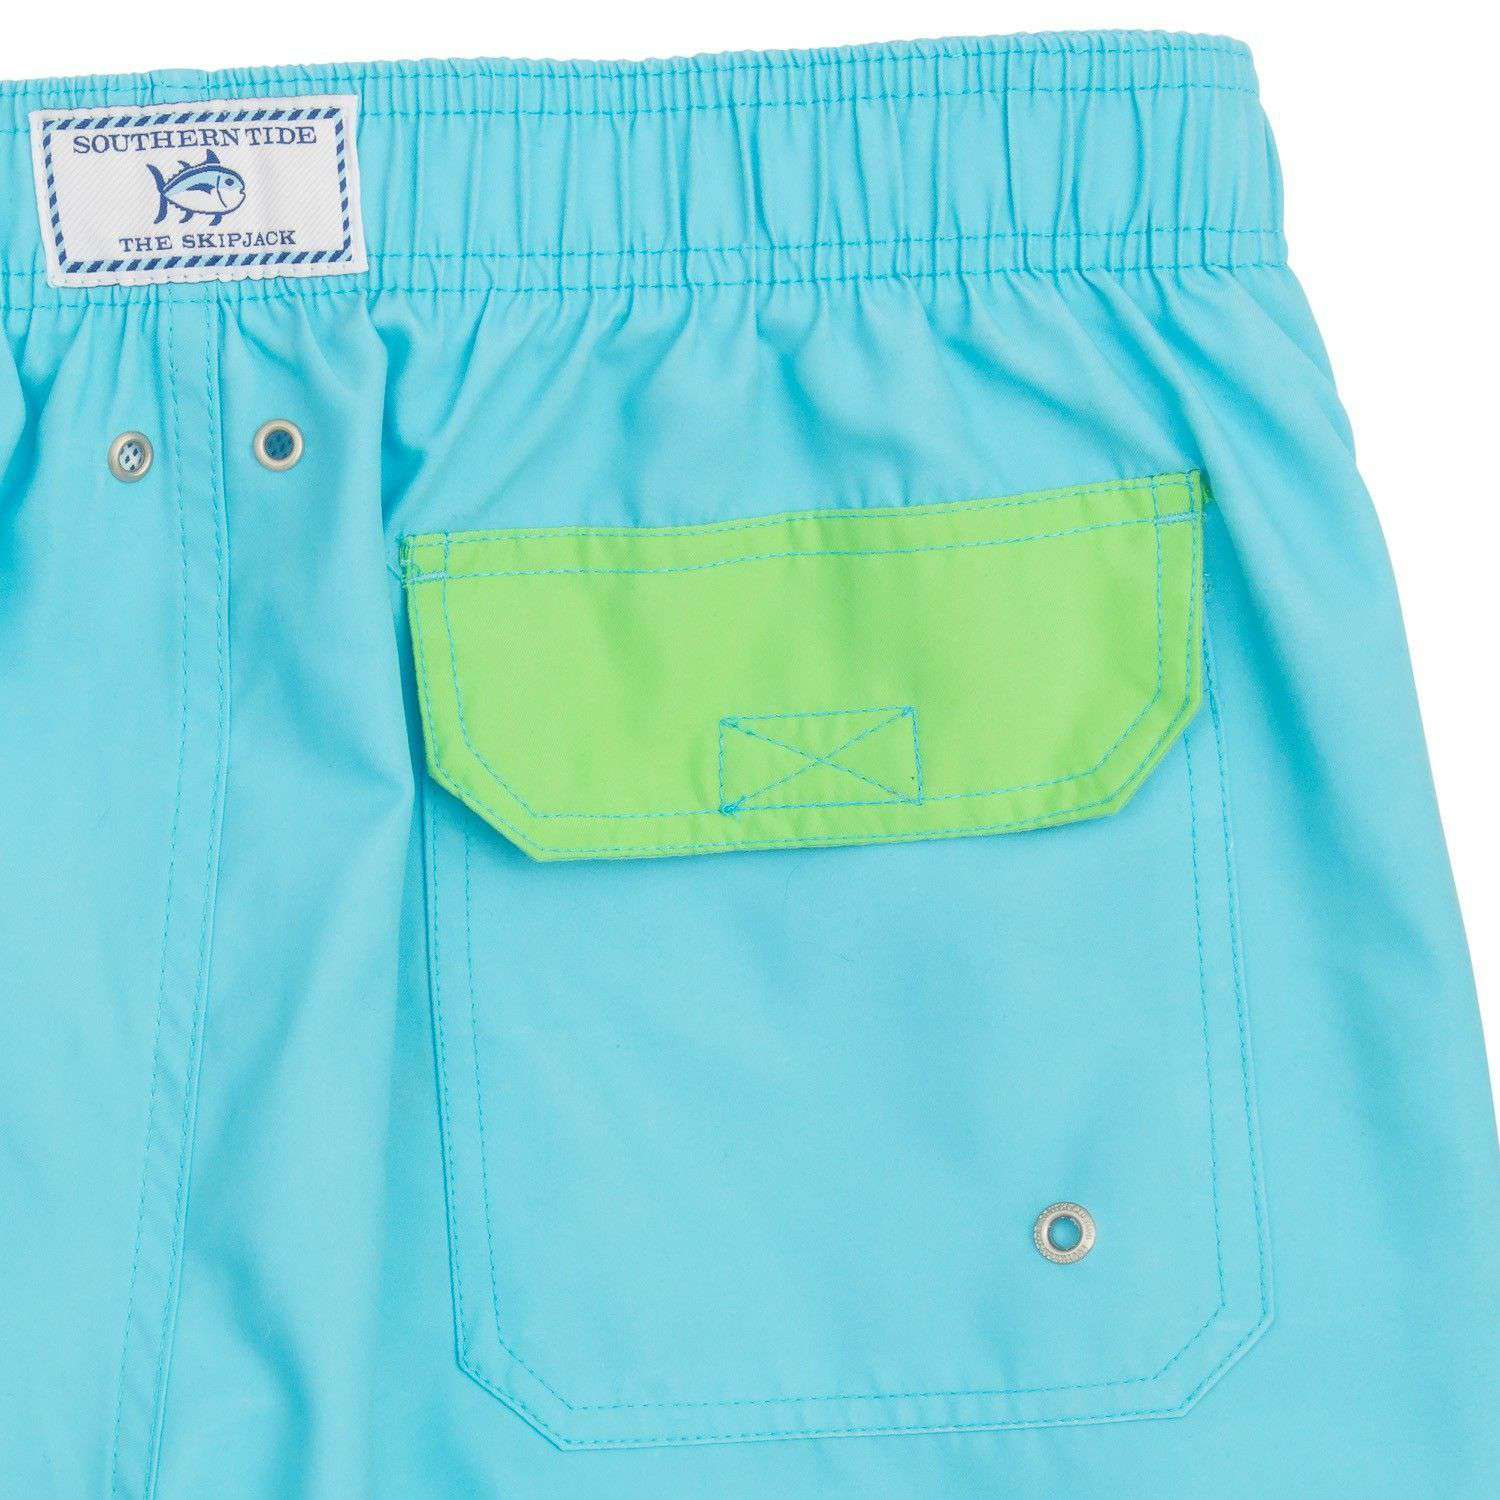 Hang Ten Swim Trunks in Turquoise Blue by Southern Tide - Country Club Prep